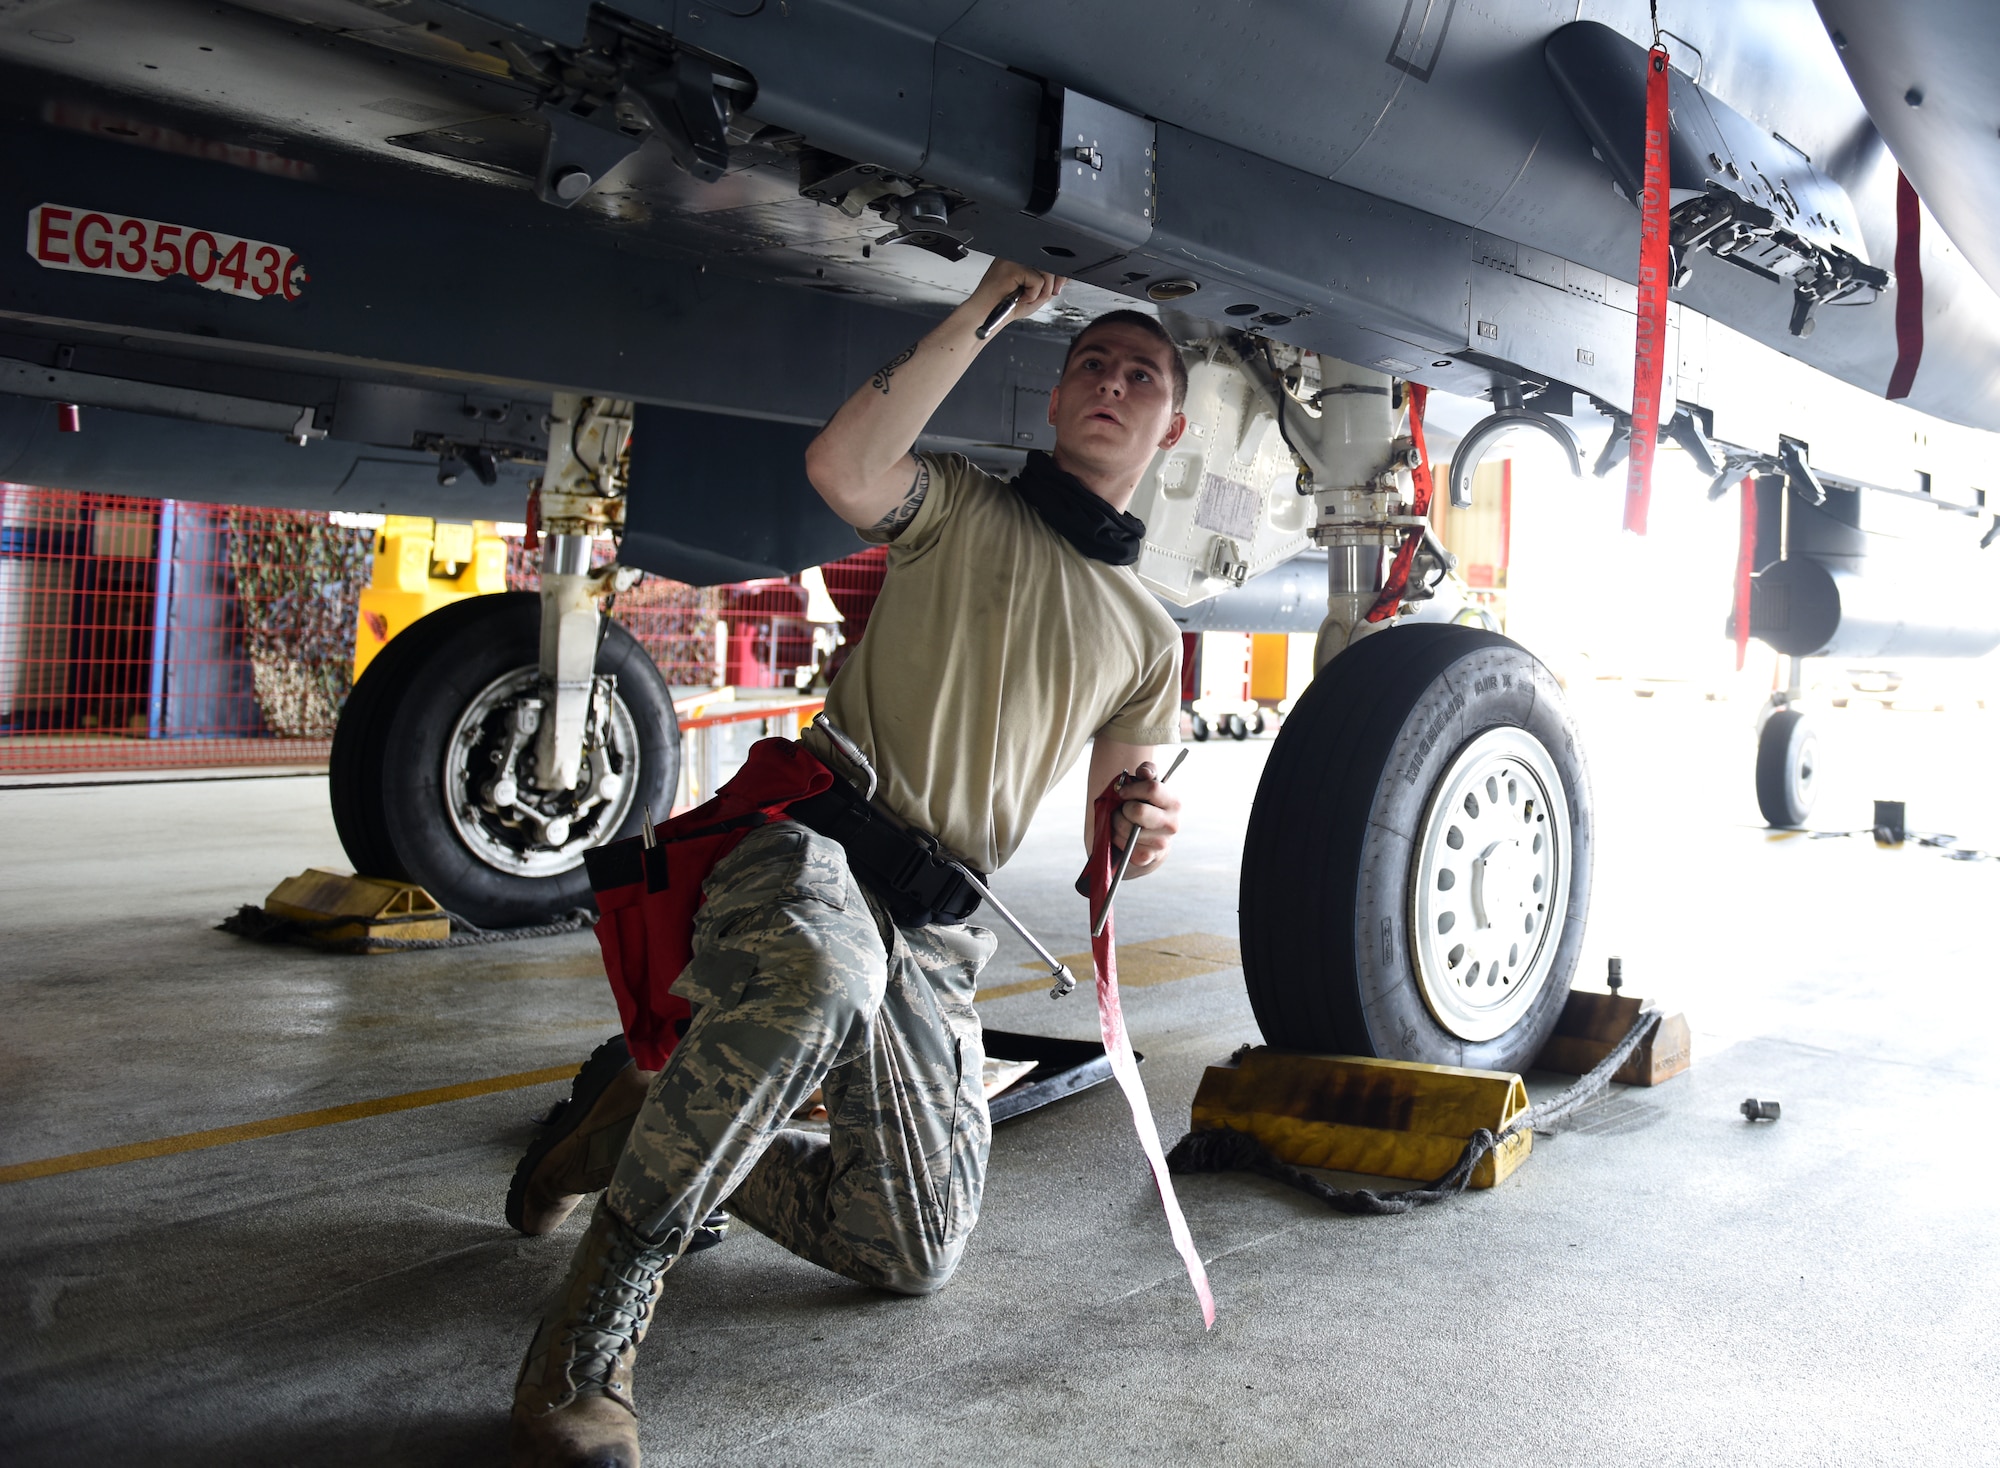 A Liberty Wing Airman assigned to the 492nd Fighter Squadron Aircraft Maintenance Unit prepares to load munitions on an F-15E Strike Eagle at Royal Air Force Lakenheath, England, June 26, 2020. Load crew competitions help Airmen test their speed and accuracy while focusing on safety and efficiency in a controlled environment. (U.S. Air Force photo by Airman 1st Class Rhonda Smith)